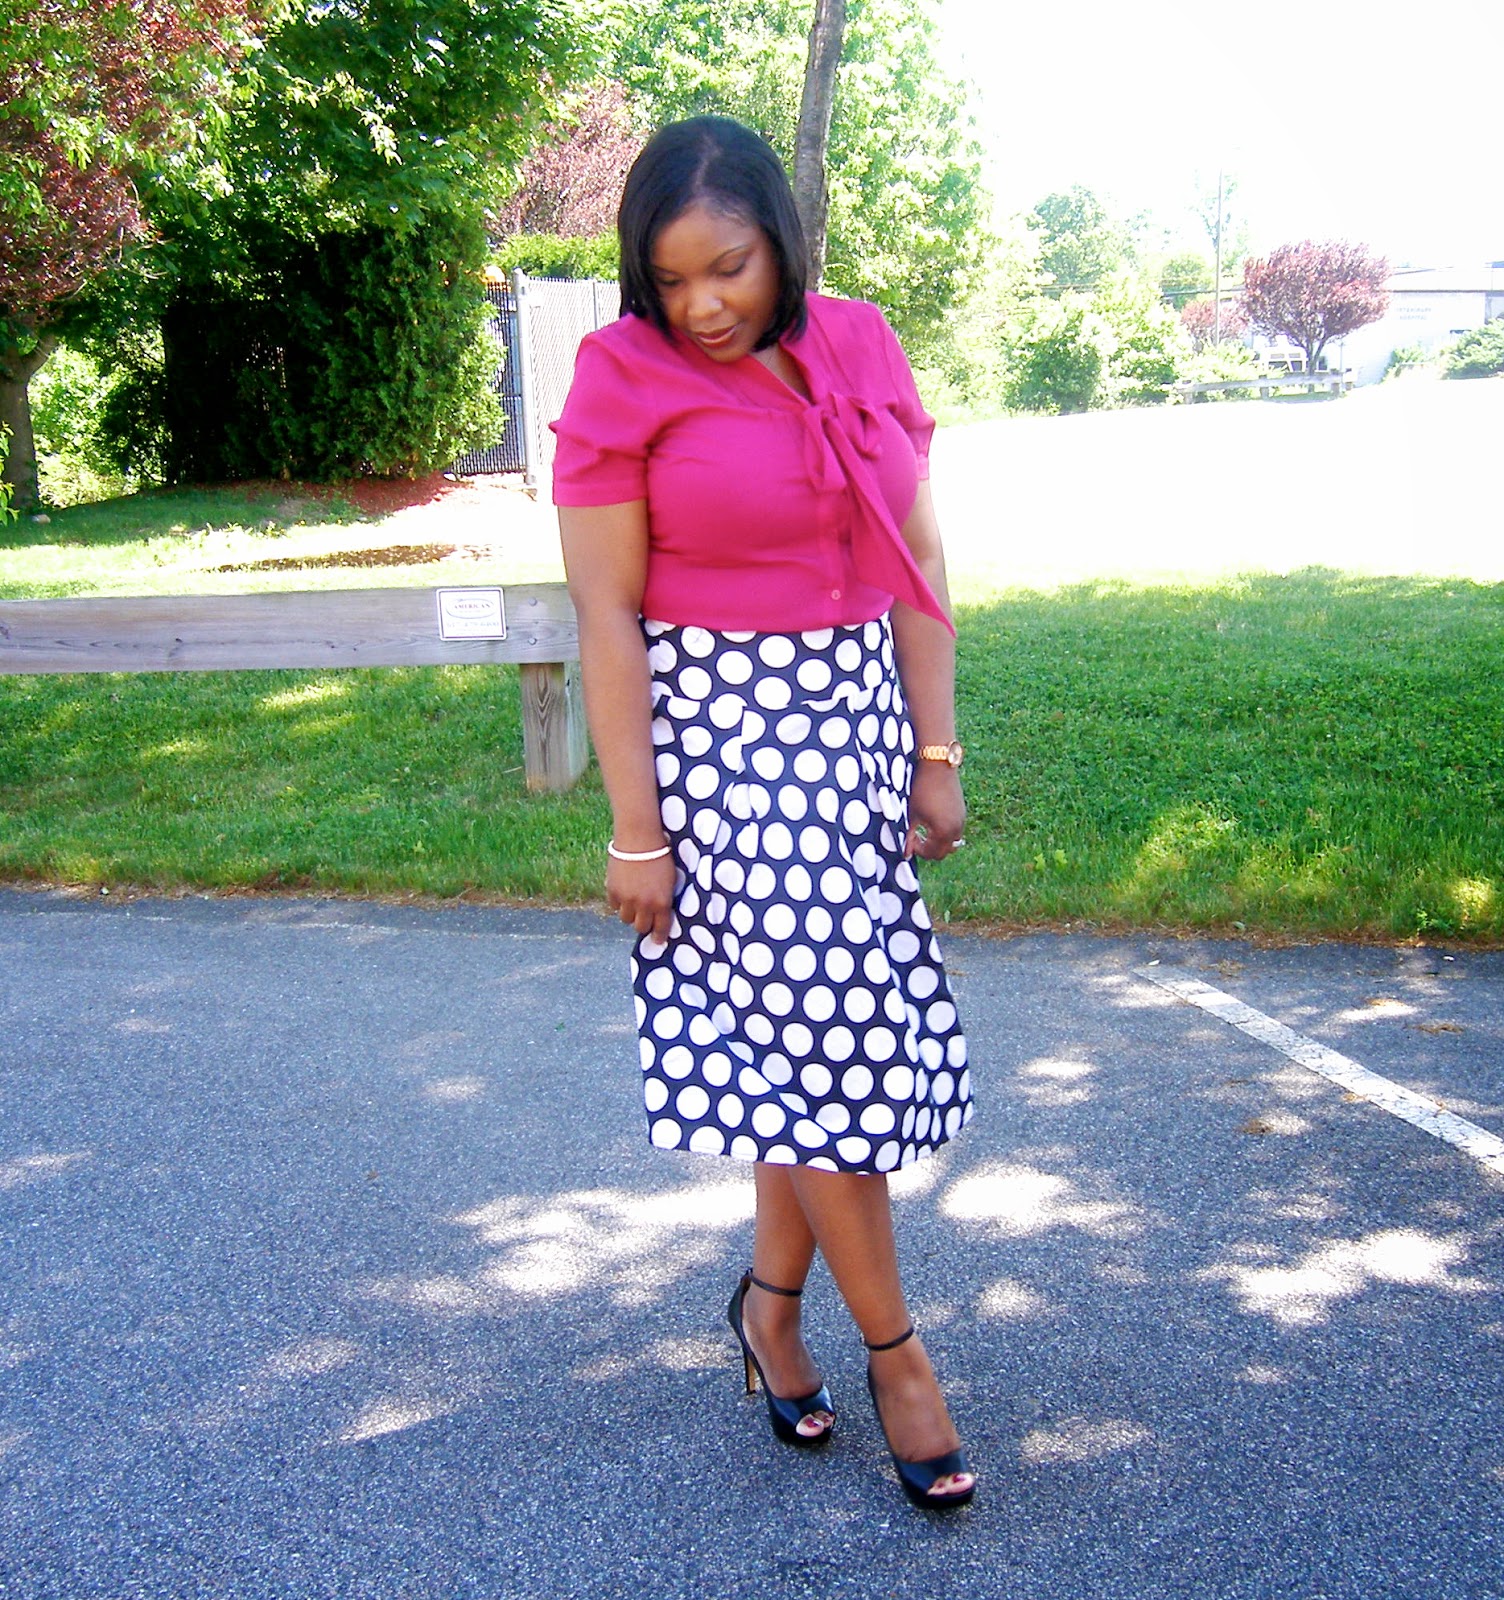 Beauty Style Growth: Hot Pink and White Polka Dots (It's a Remix)